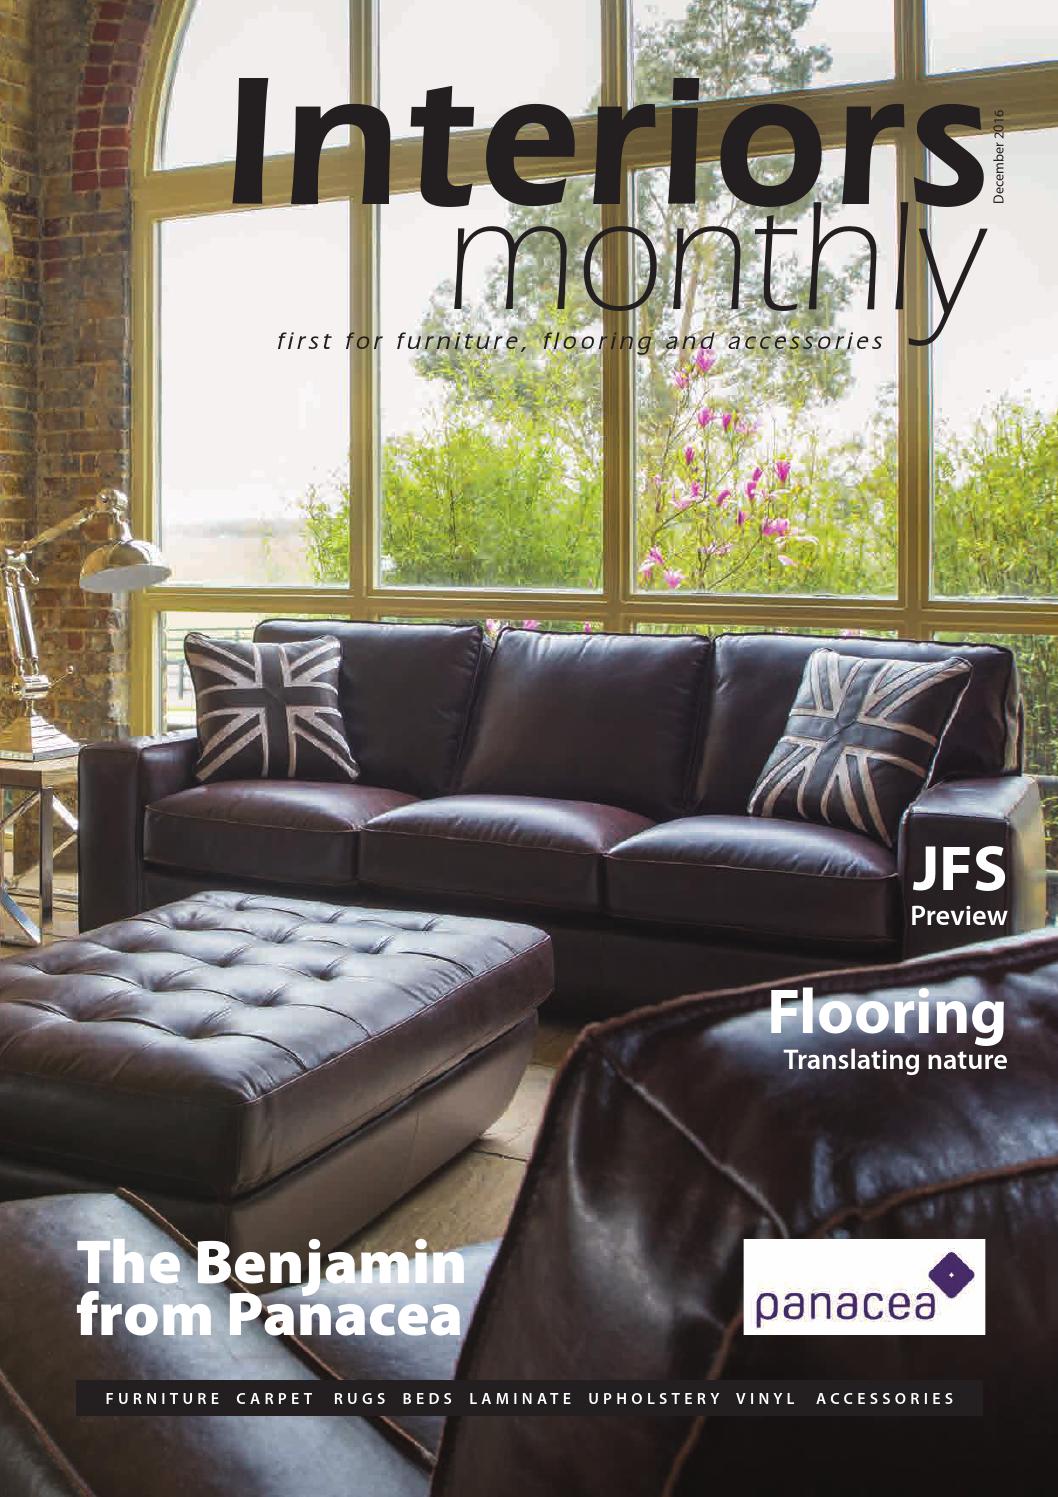 Chaise En Palette Nouveau Interiors Monthly December by Joanne Paull issuu